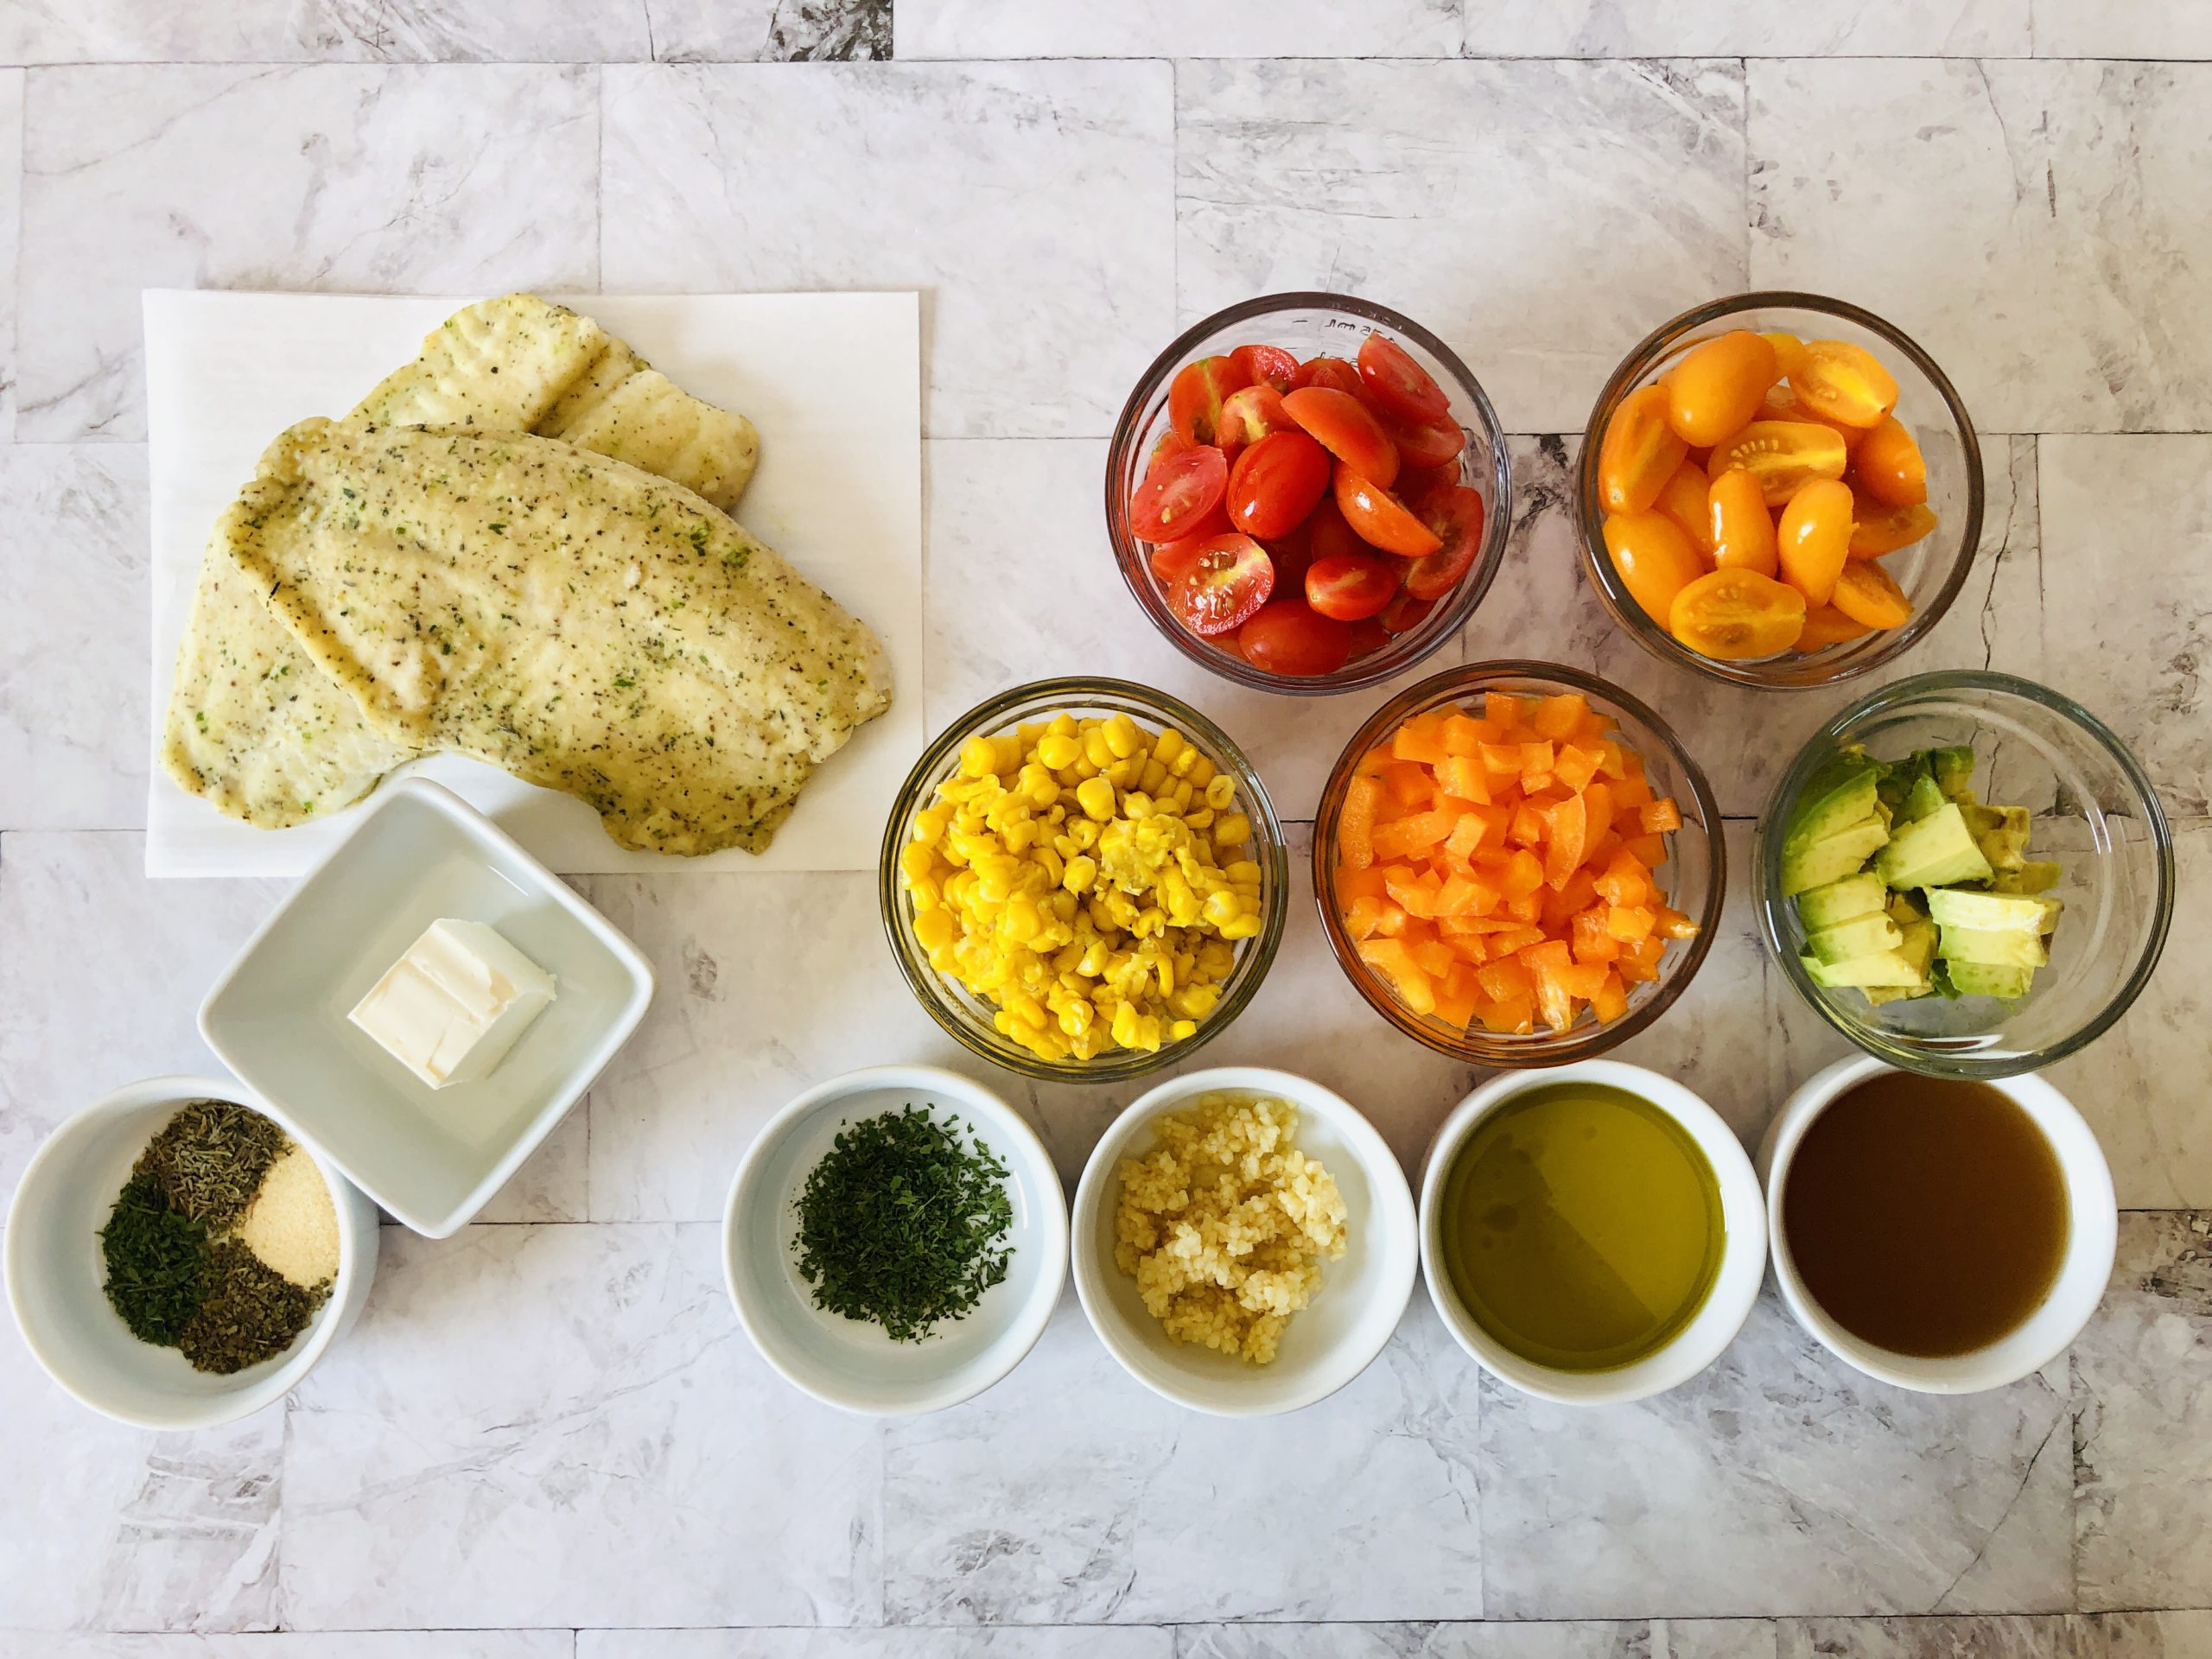 Fish, corn tomatoes, apple cider, etc for the Oven Baked Haddock with Corn Salad.